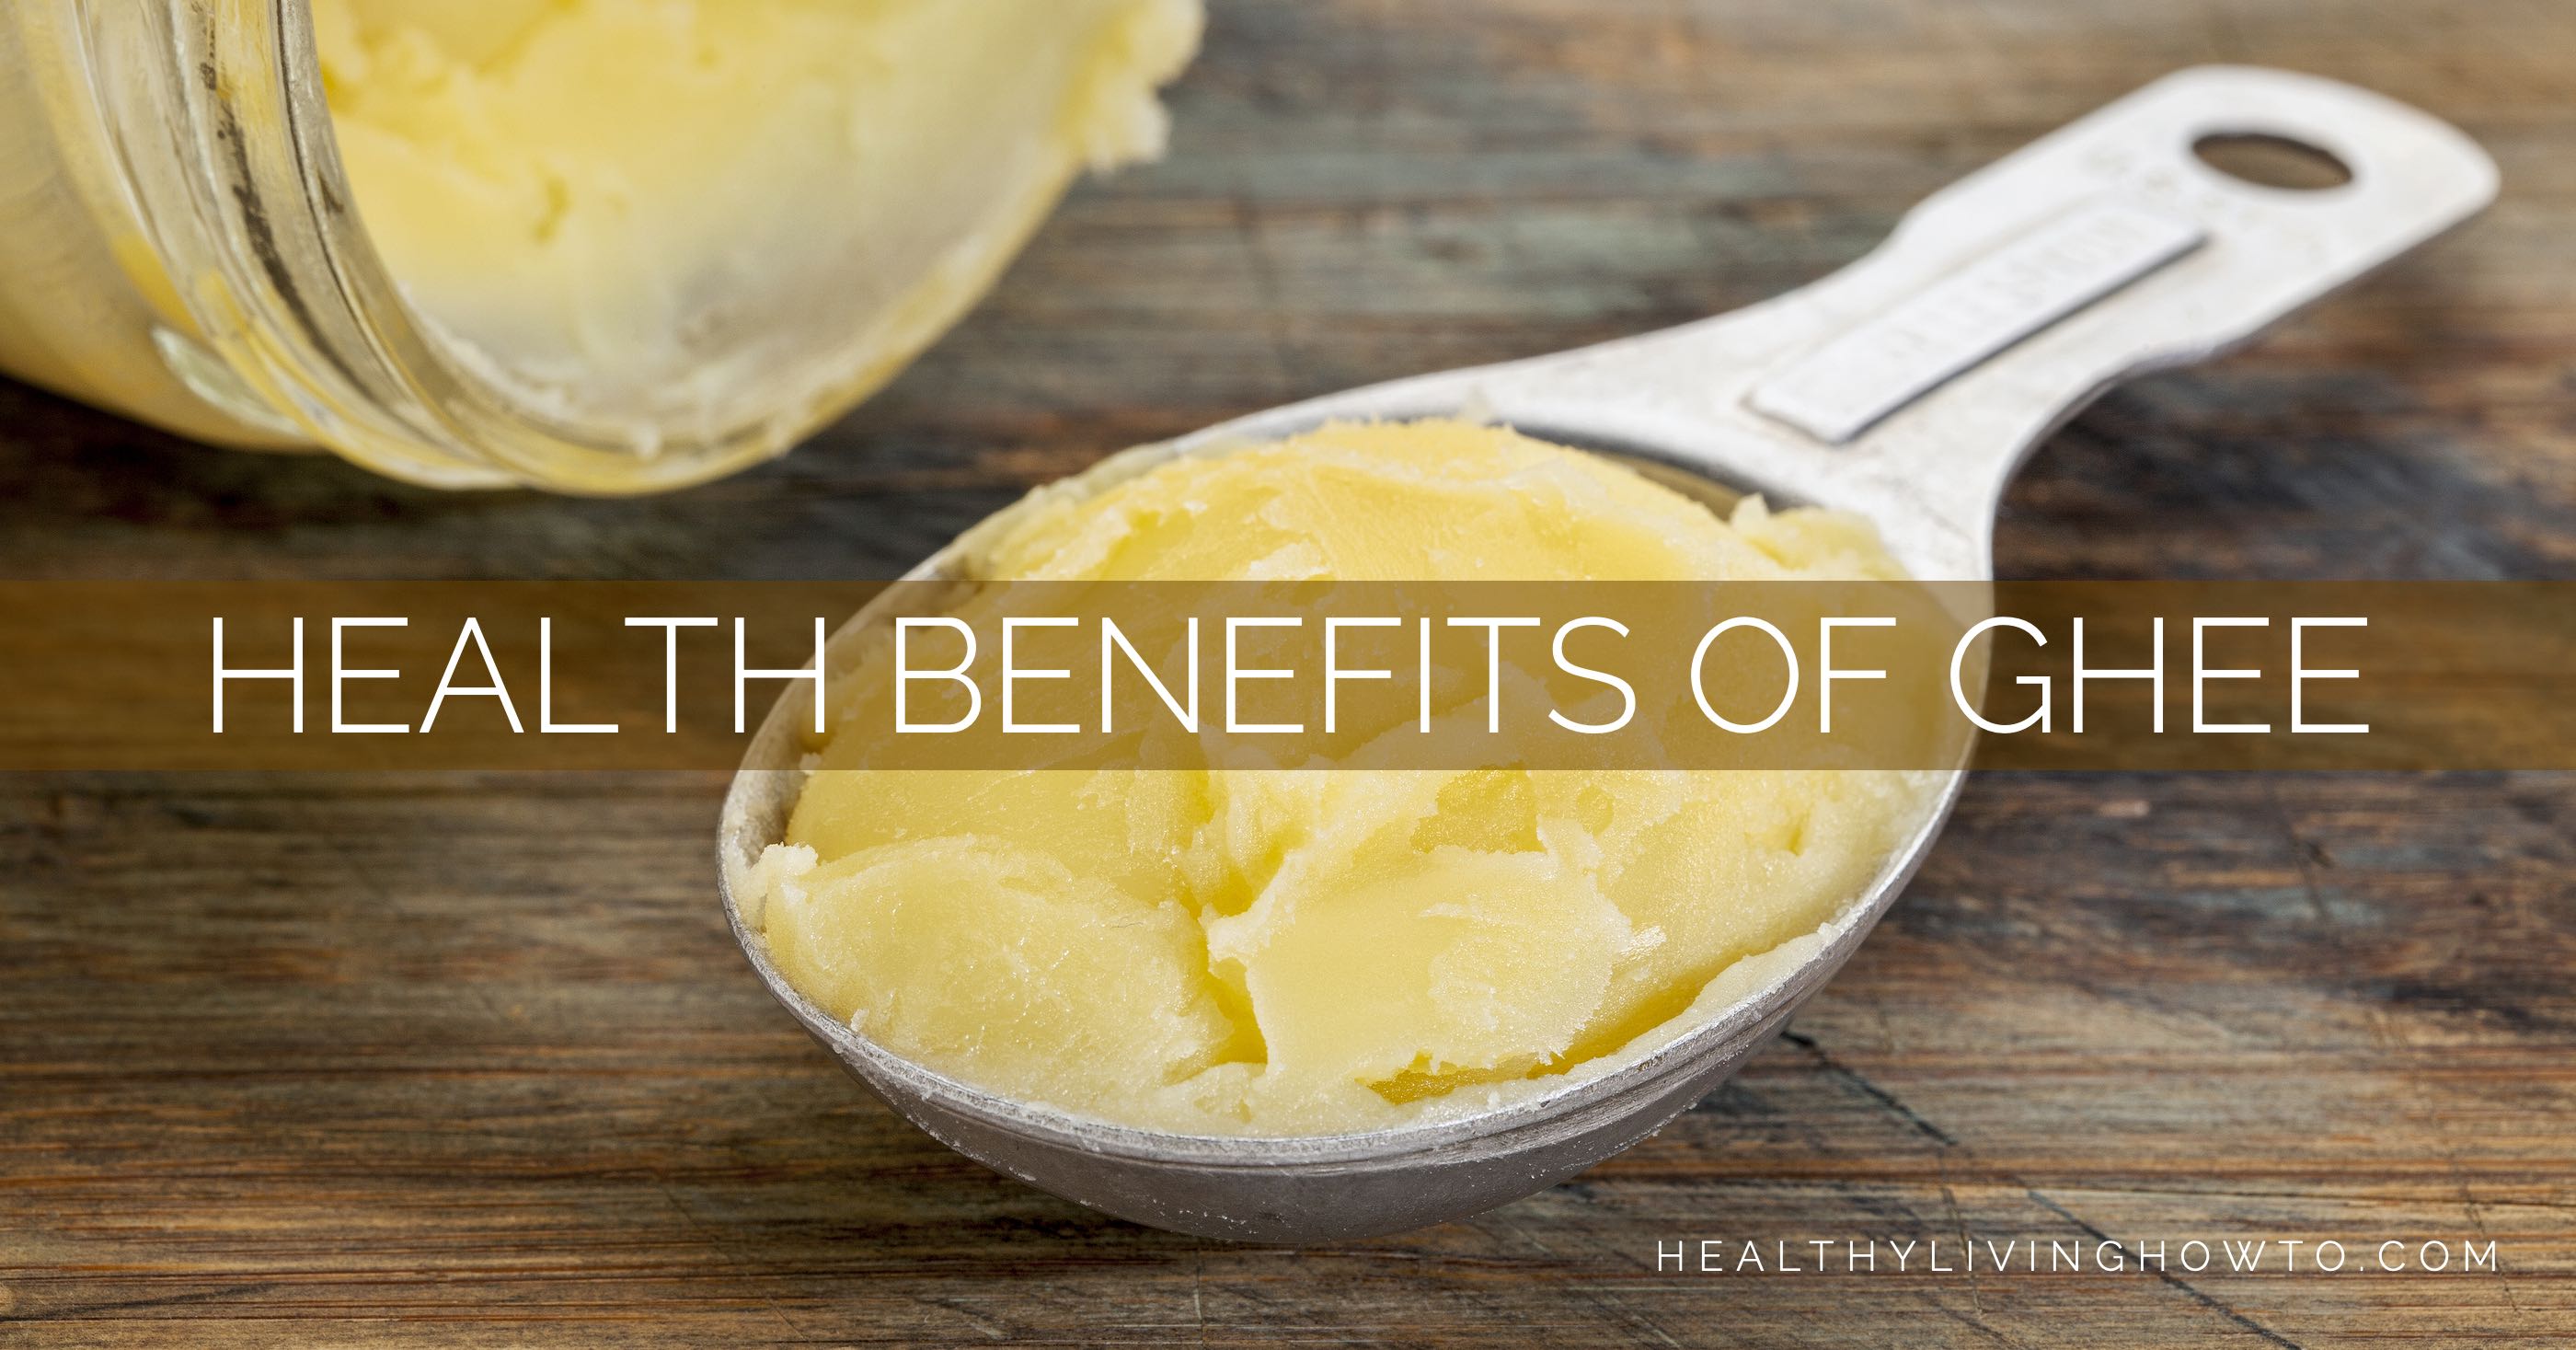 Health Benefits of Ghee | healthylivinghowto.com